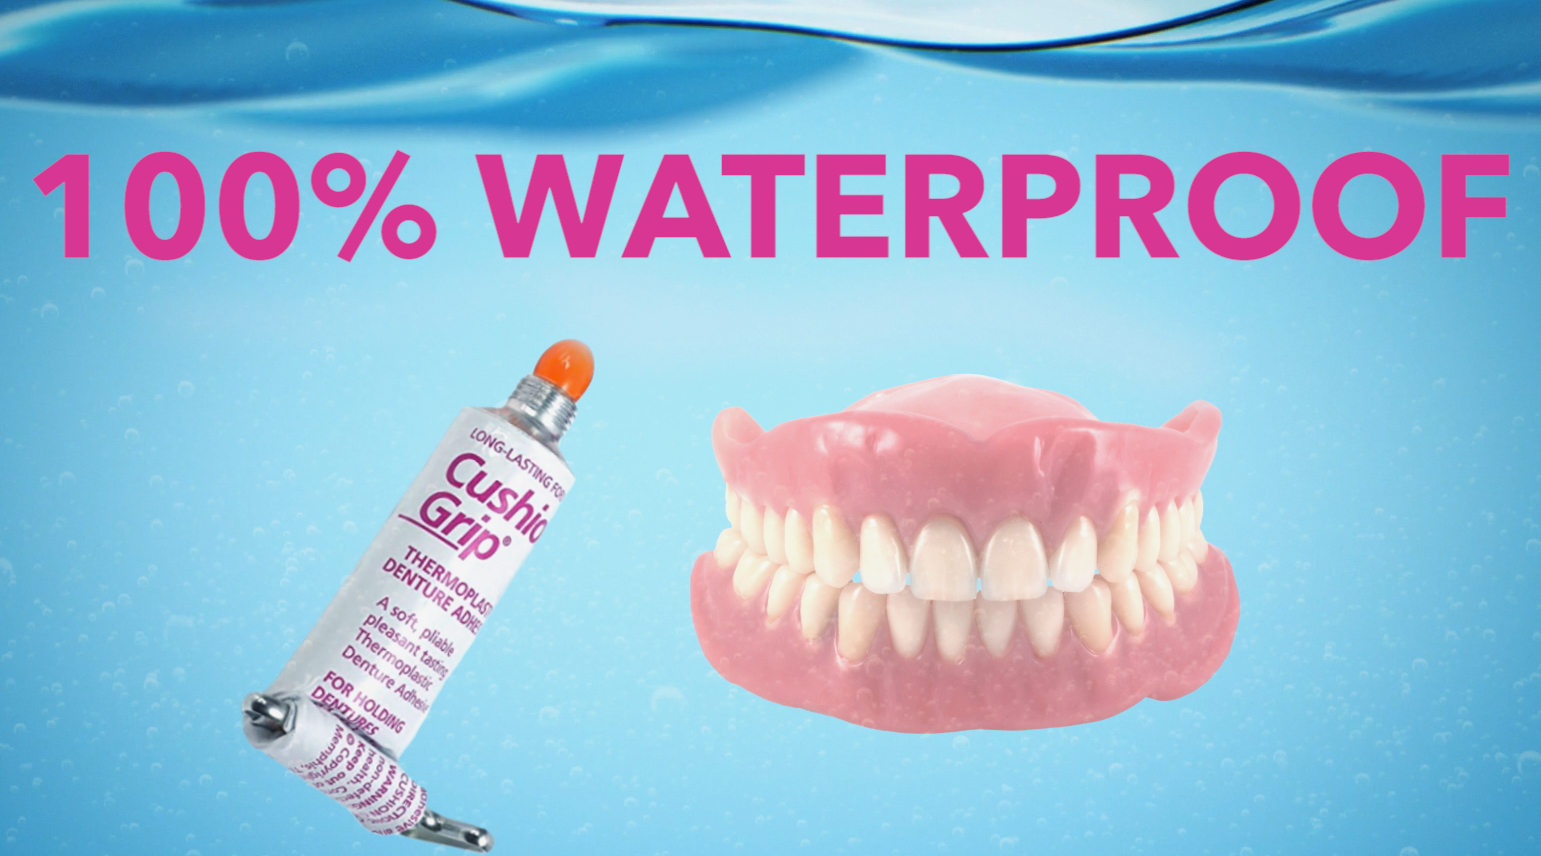 The only zinc-free, waterproof denture adhesive that don't need mixing and has no taste